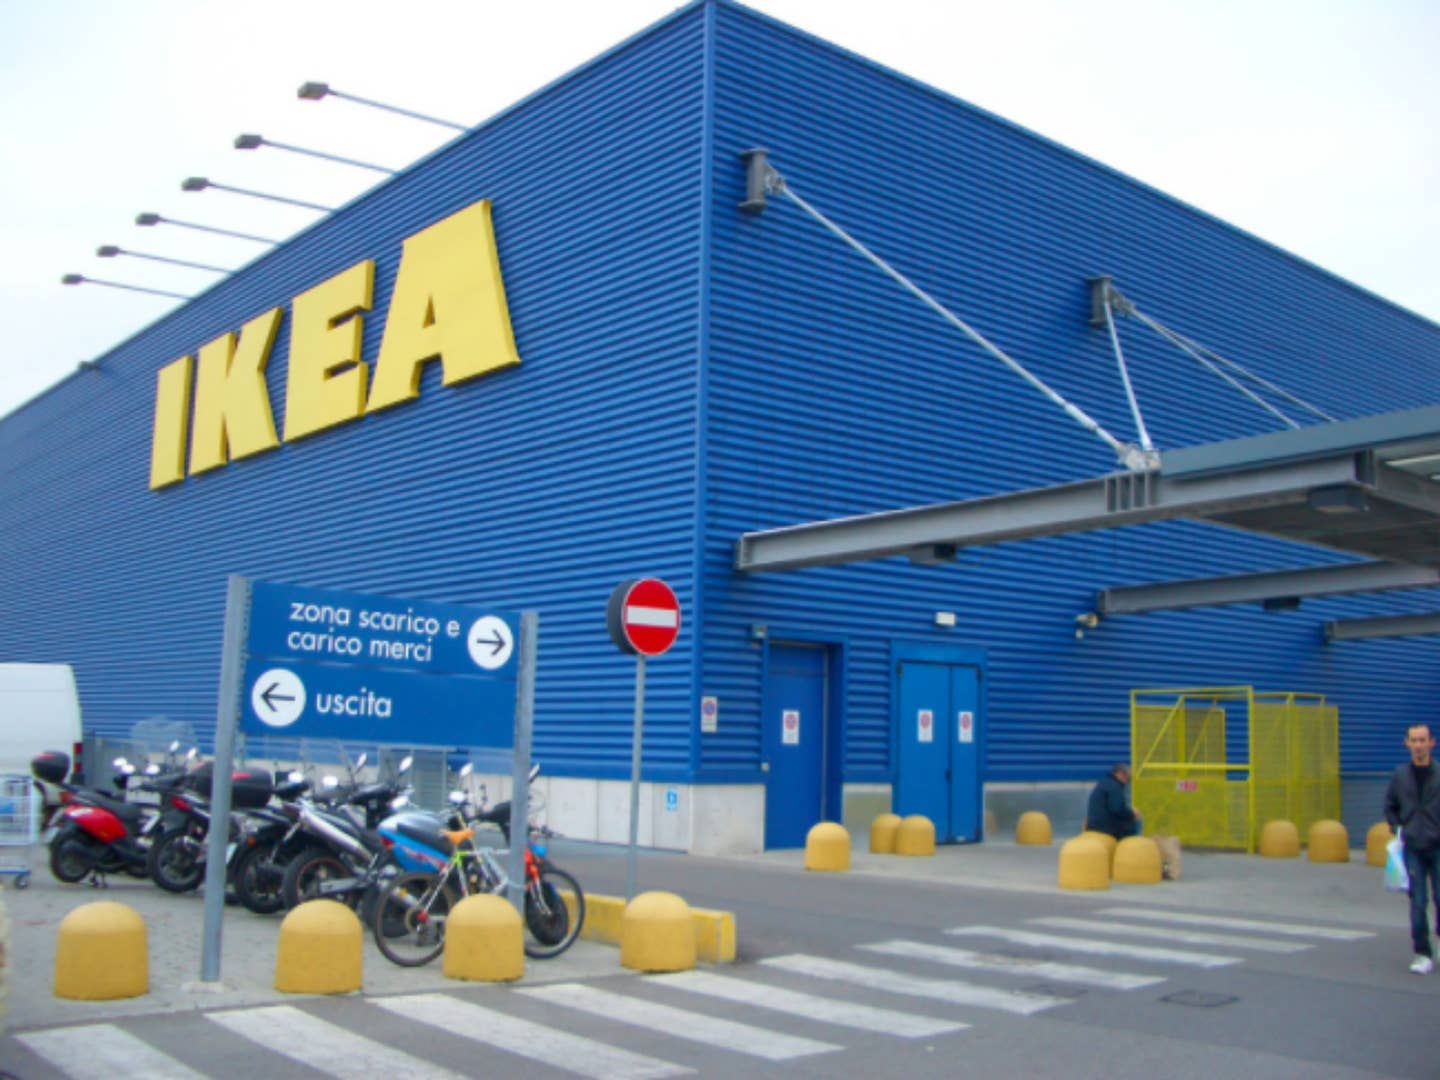 IKEA Unveils Plan to Cut its Food Waste in Half by 2020